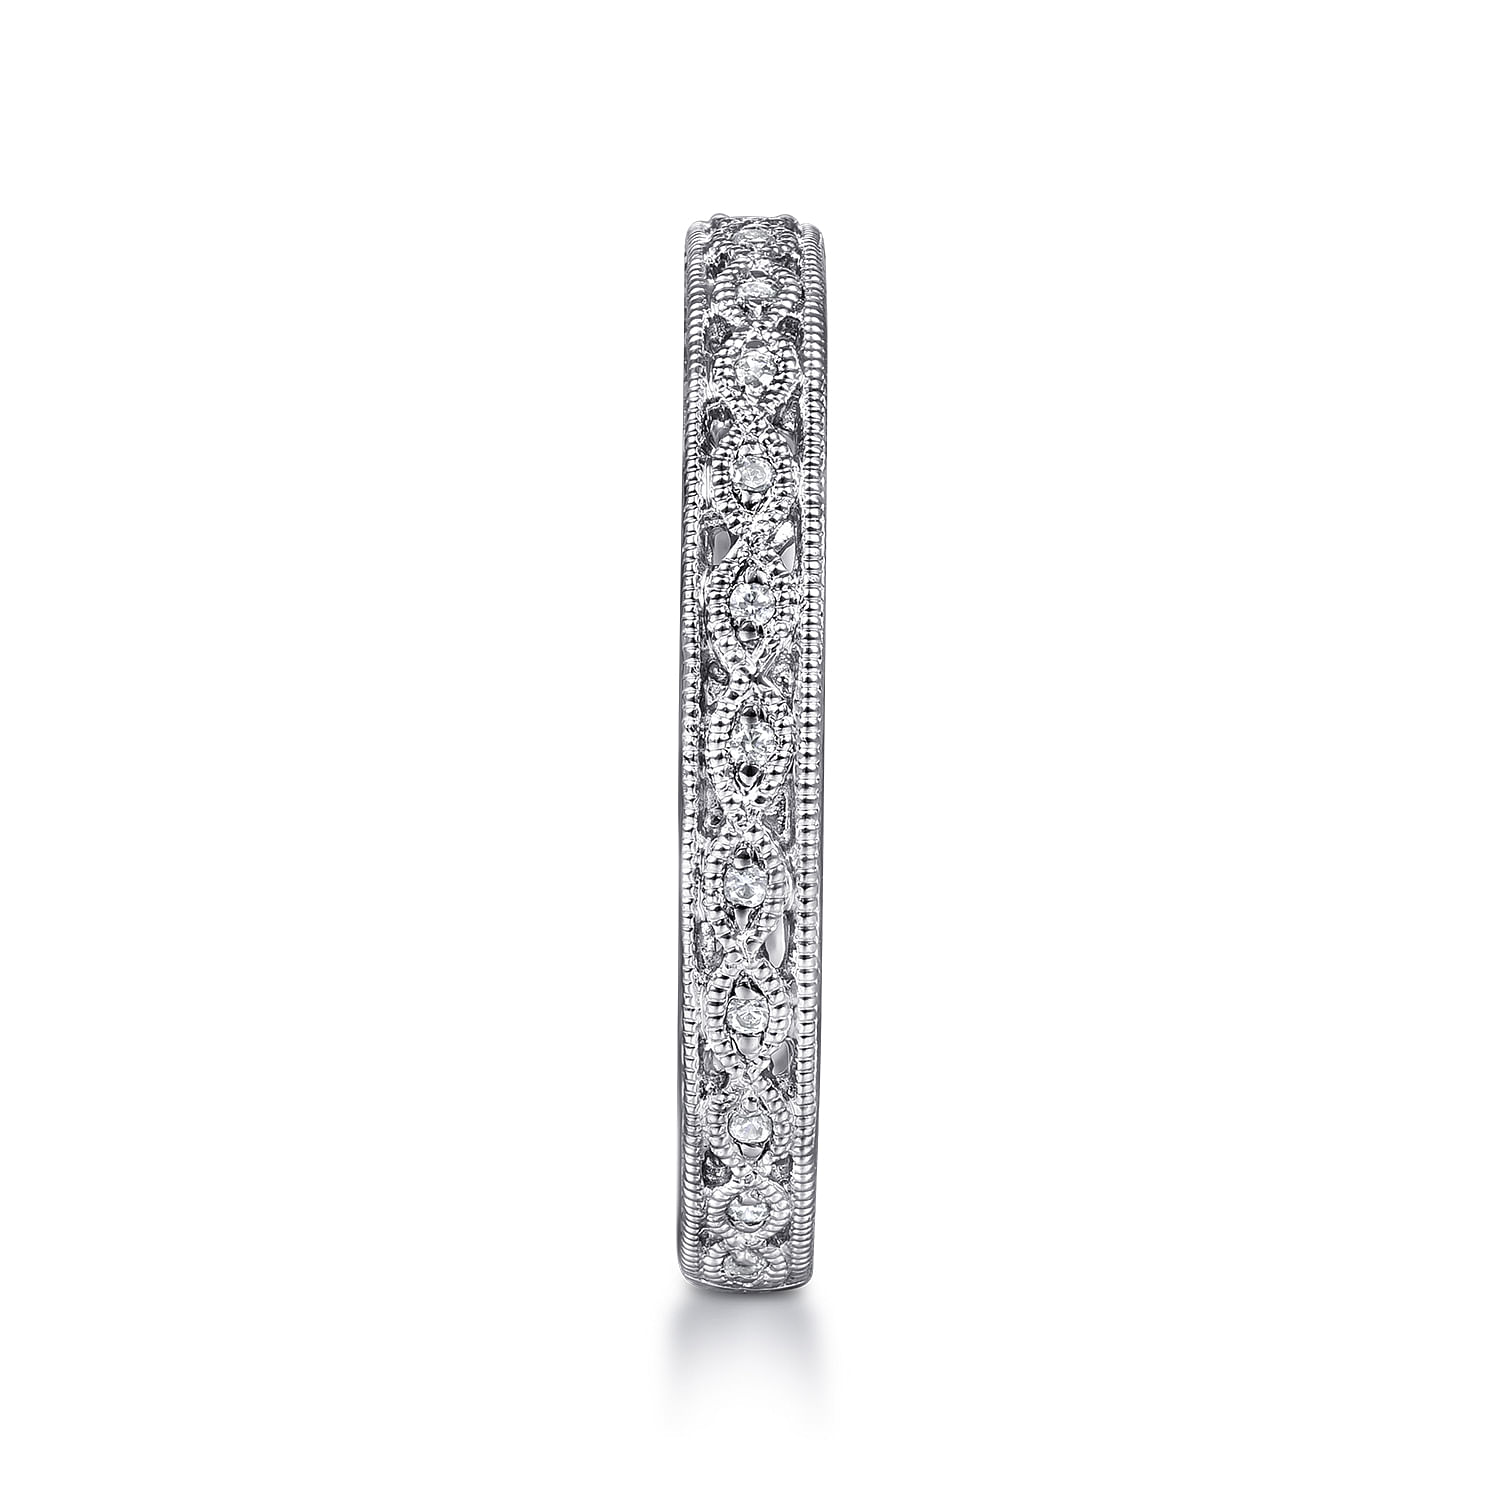 14K White Gold Intricate Cutout Stackable Diamond Ring